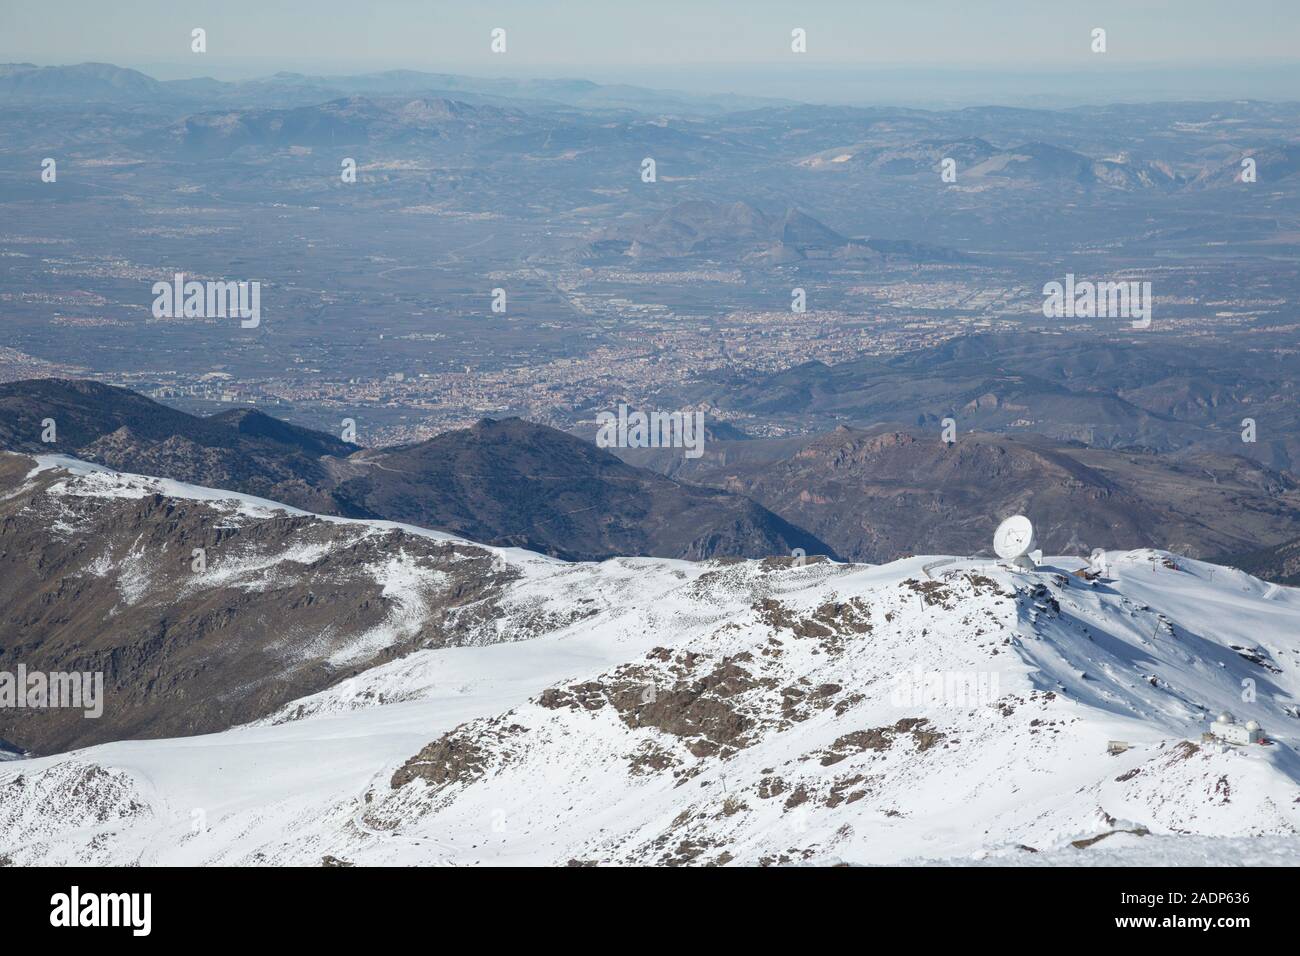 The IRAM radio astronomy telespcope in the Sierra Nevada mountains, with Granada city in the distance below. Andalusia, Spain Stock Photo